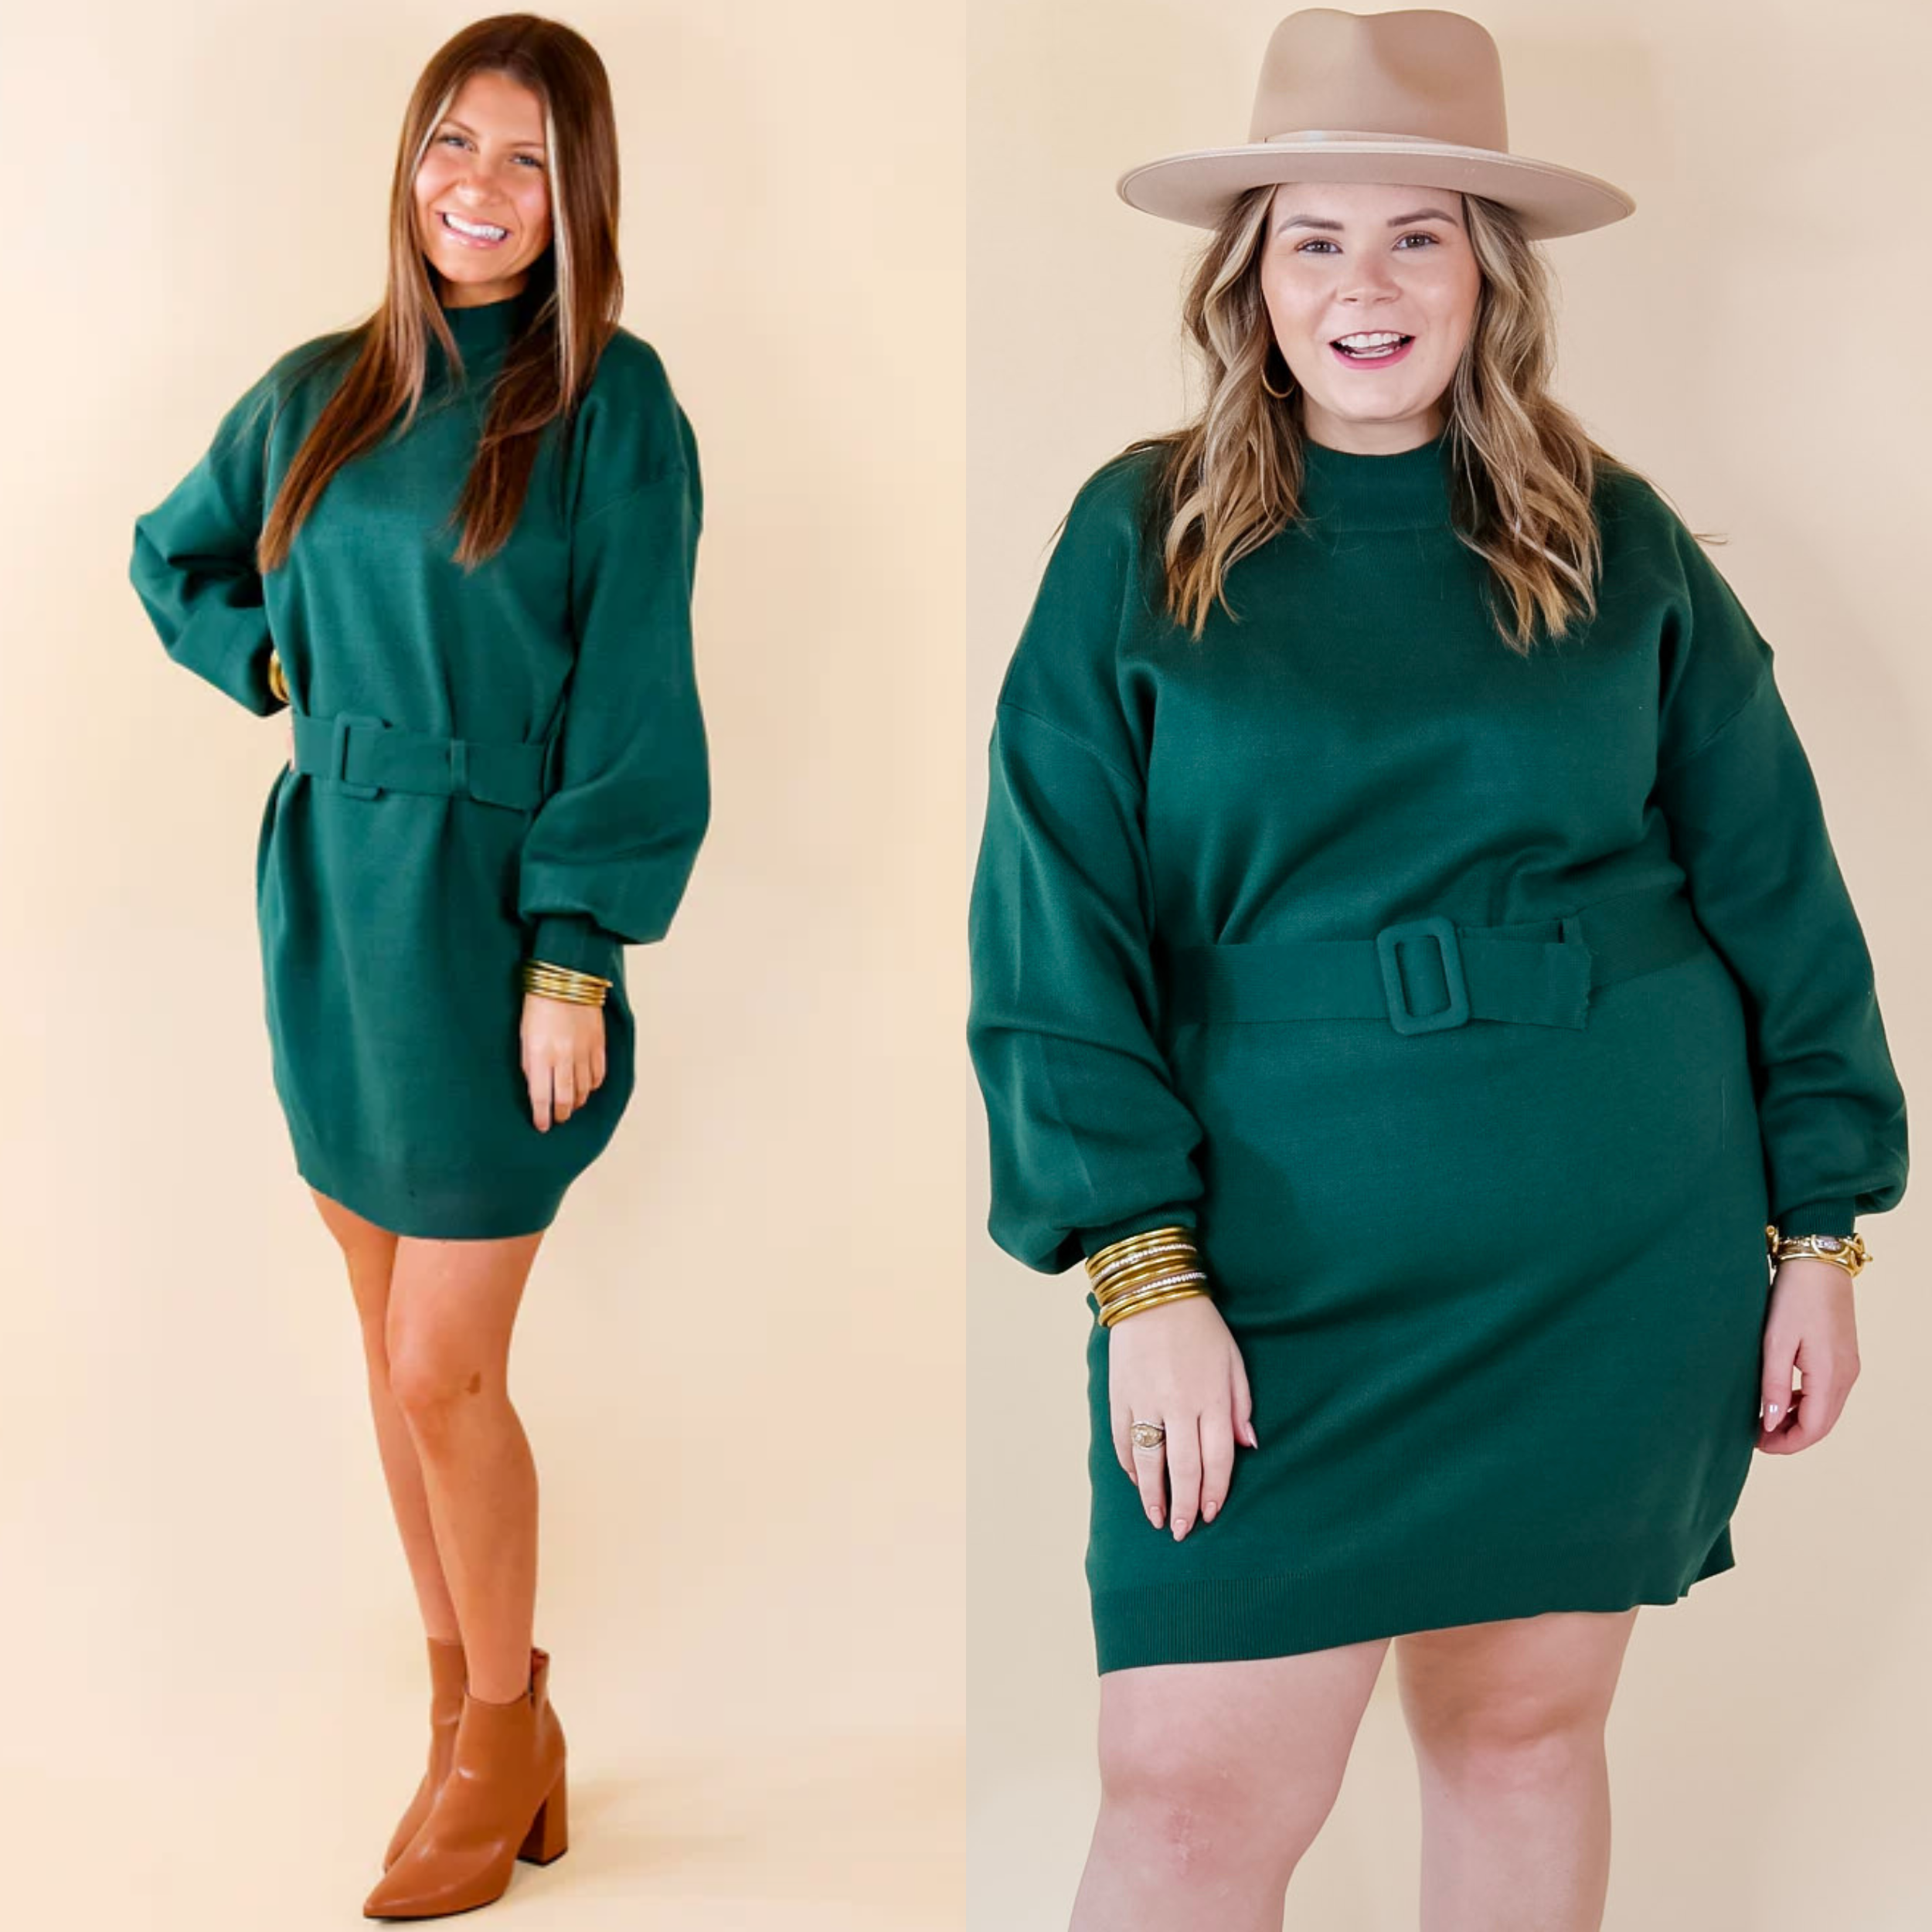 Model is wearing a hunter green sweater dress with belt. Model has paired the dress with brown booties and gold tone jewelry.